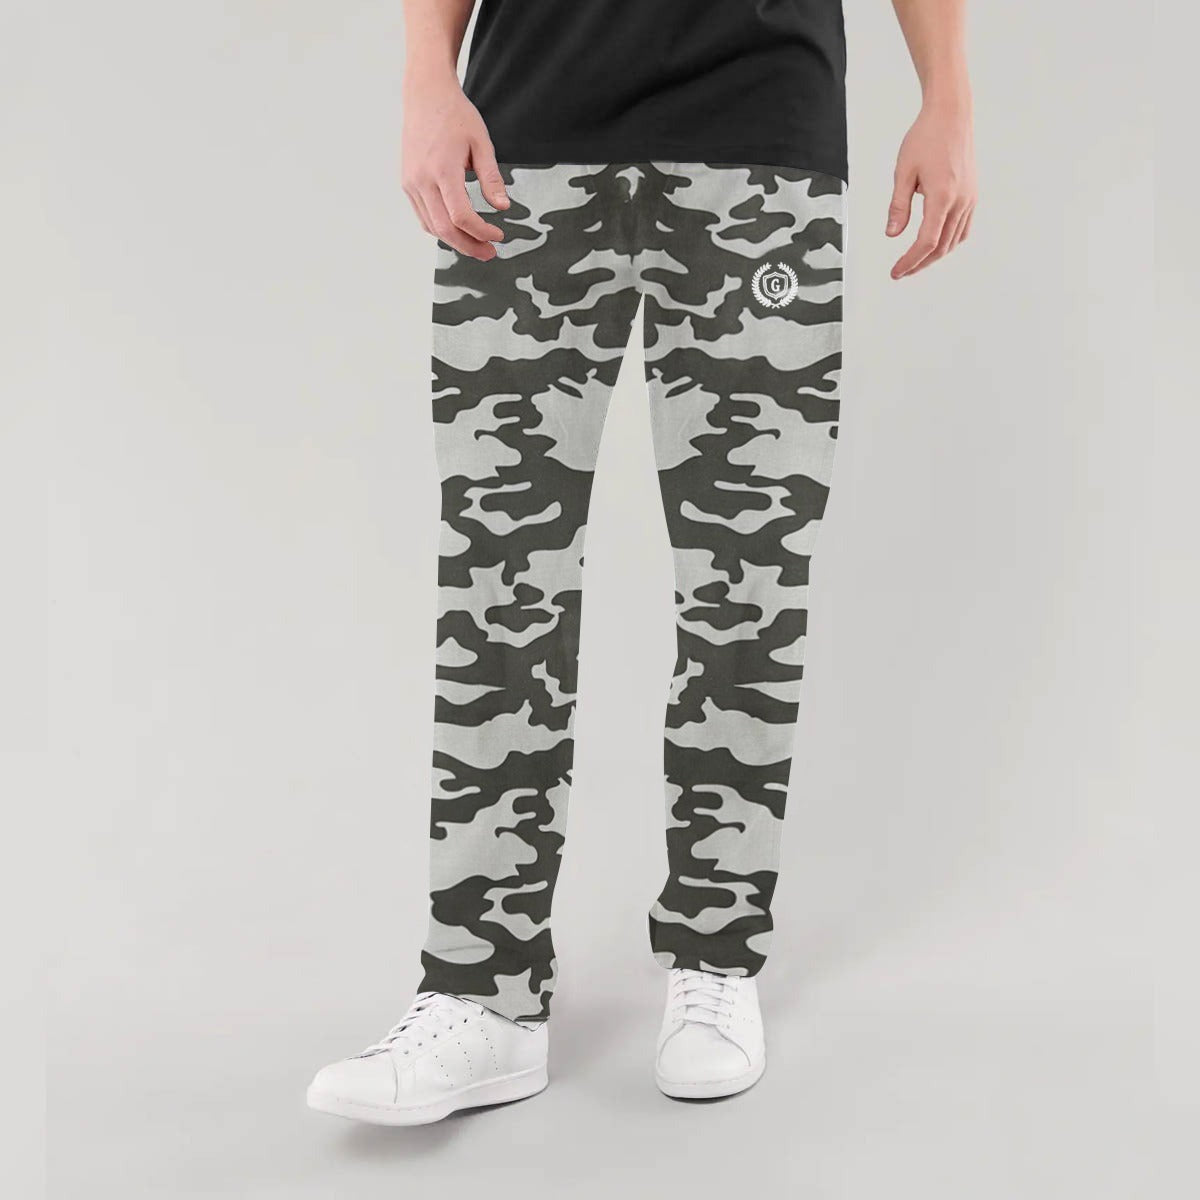 HG SIGNATURE EMBROIDERED CAMOUFLAGE SOFT COTTON TROUSER